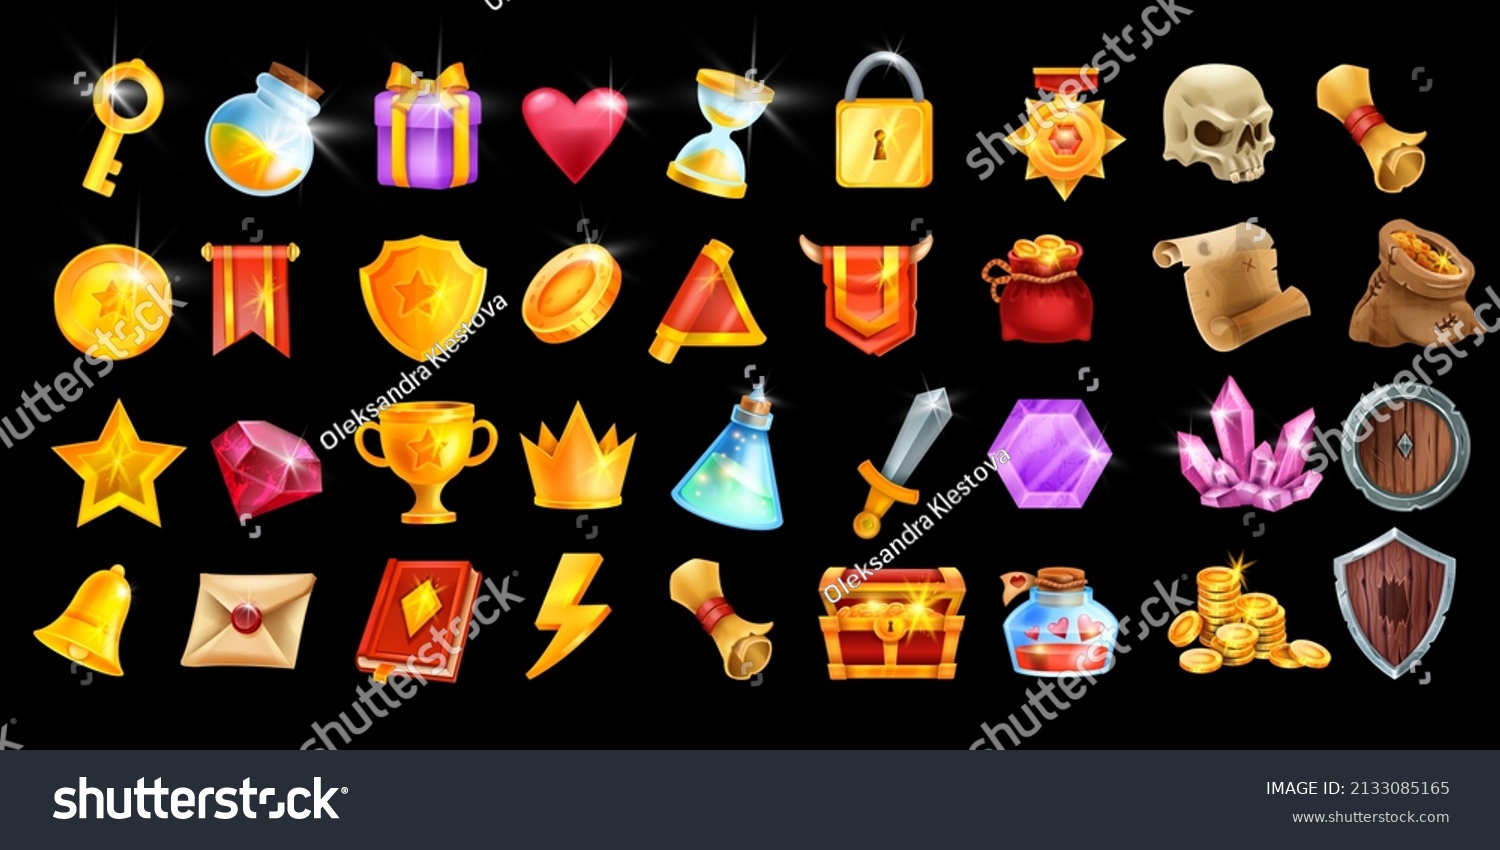 SVG of Game icon vector set, RPG UI winner badge kit, casino slot gambling machine objects, golden coin, crown. Medieval fantasy design elements, victory level up trophy, magic potion. Game icon collection svg